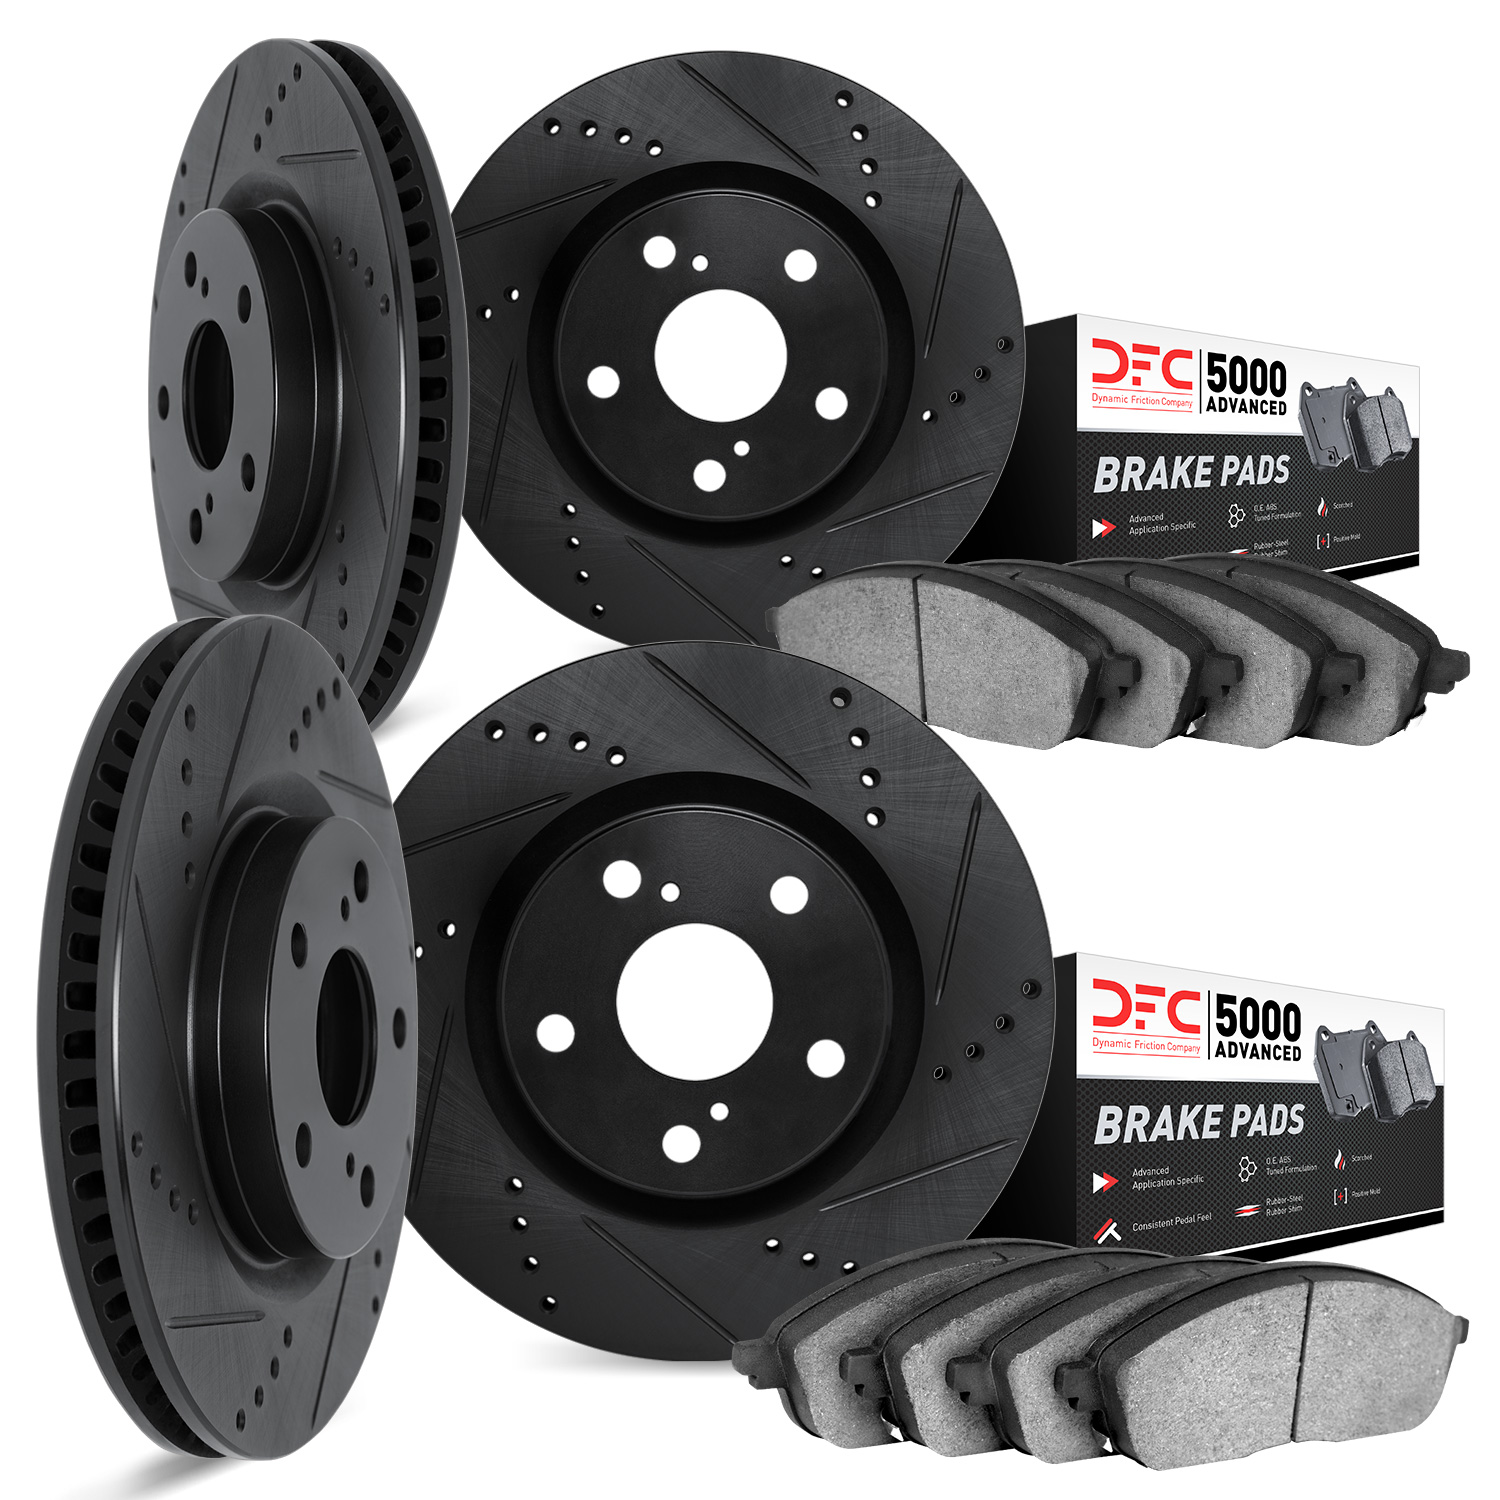 8504-31016 Drilled/Slotted Brake Rotors w/5000 Advanced Brake Pads Kit [Black], 2008-2010 BMW, Position: Front and Rear